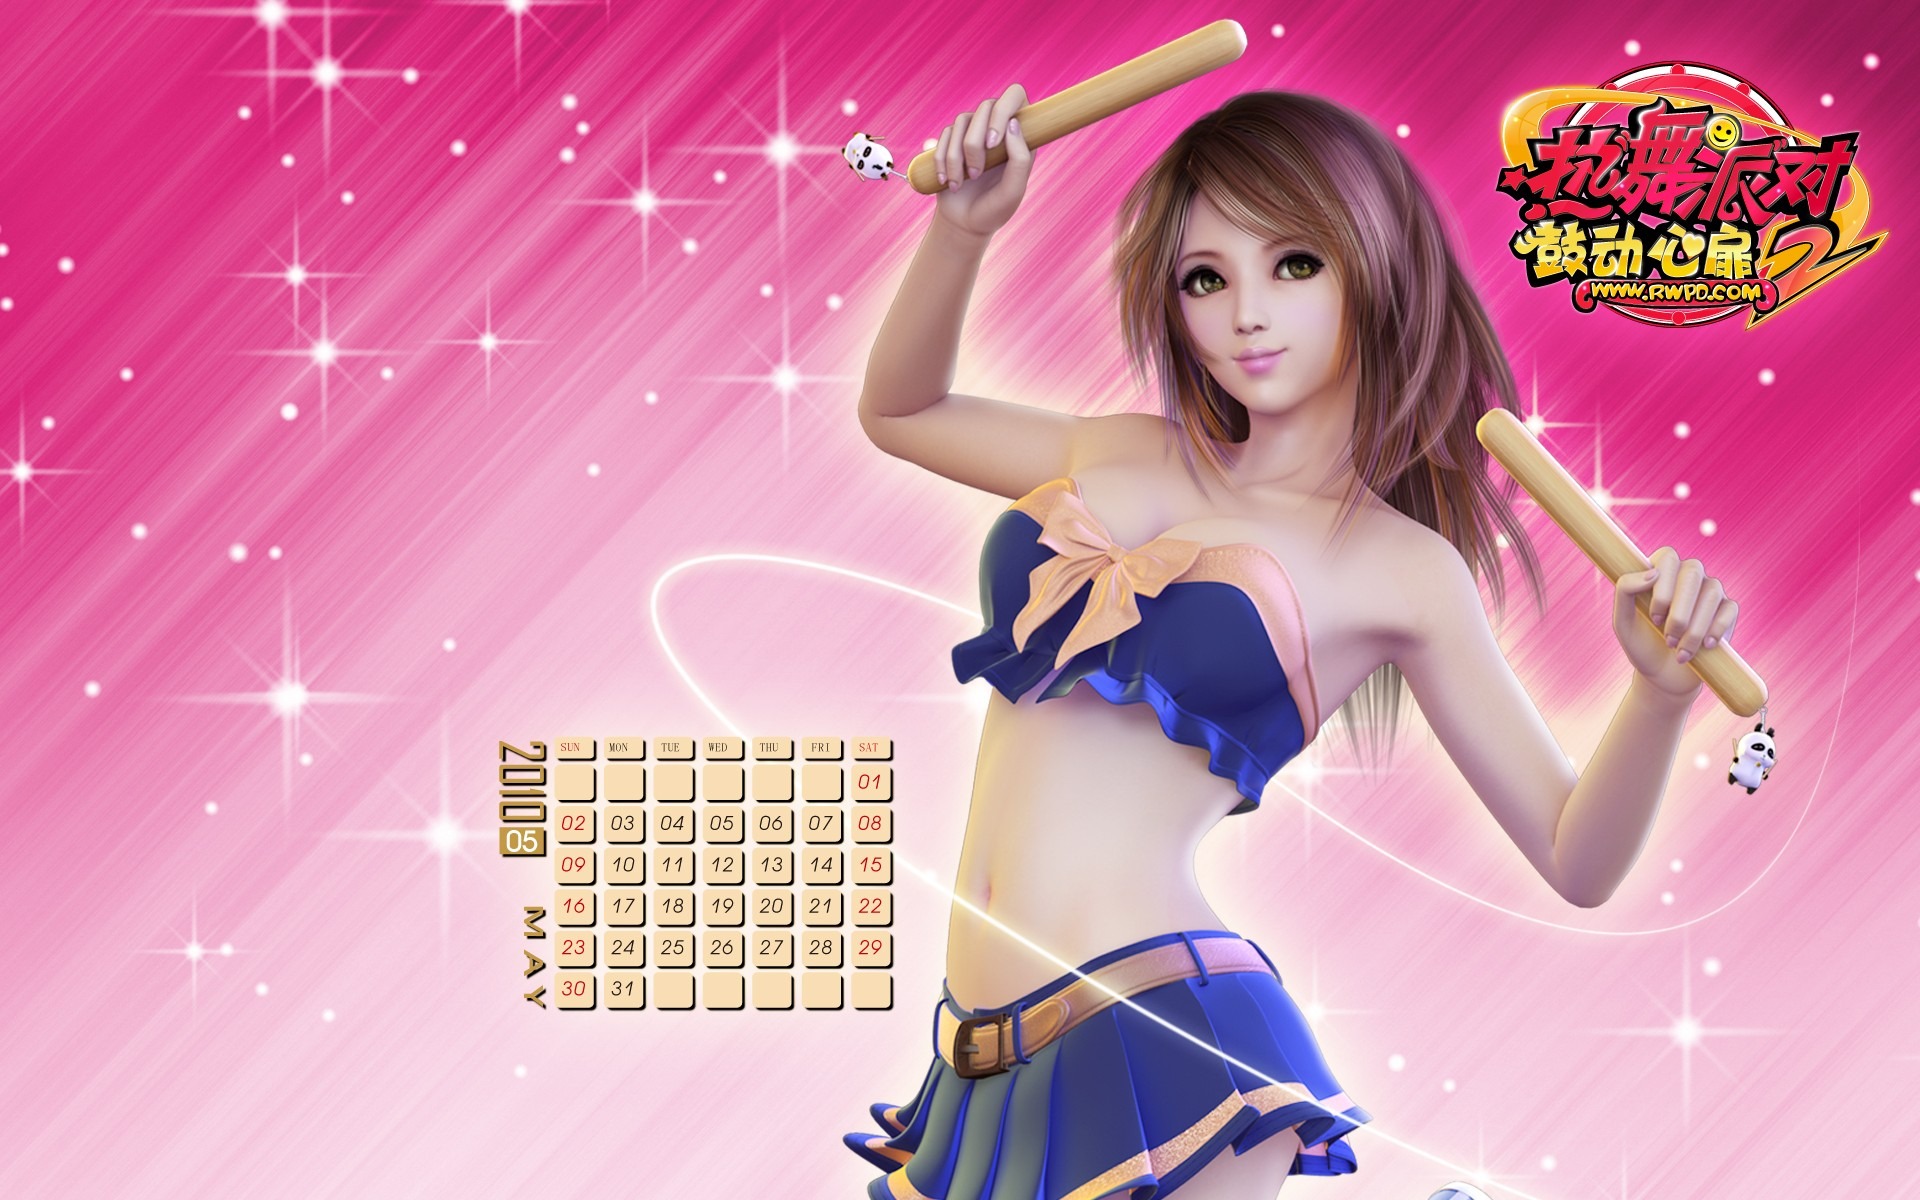 Online game Hot Dance Party II official wallpapers #24 - 1920x1200